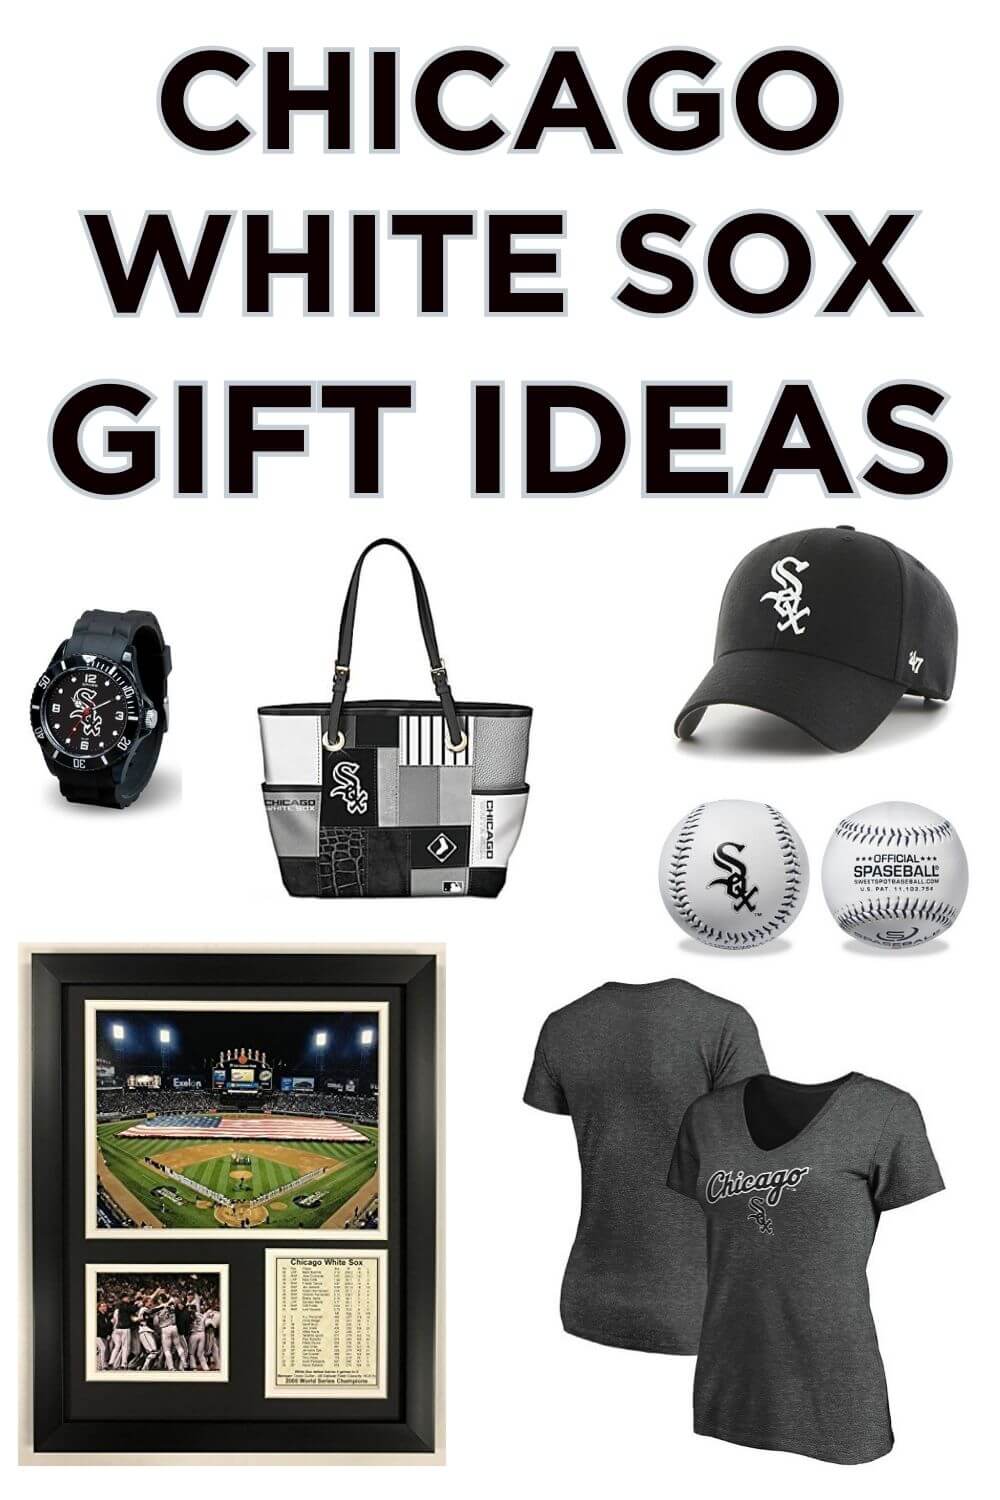 Chicago White Sox Gifts